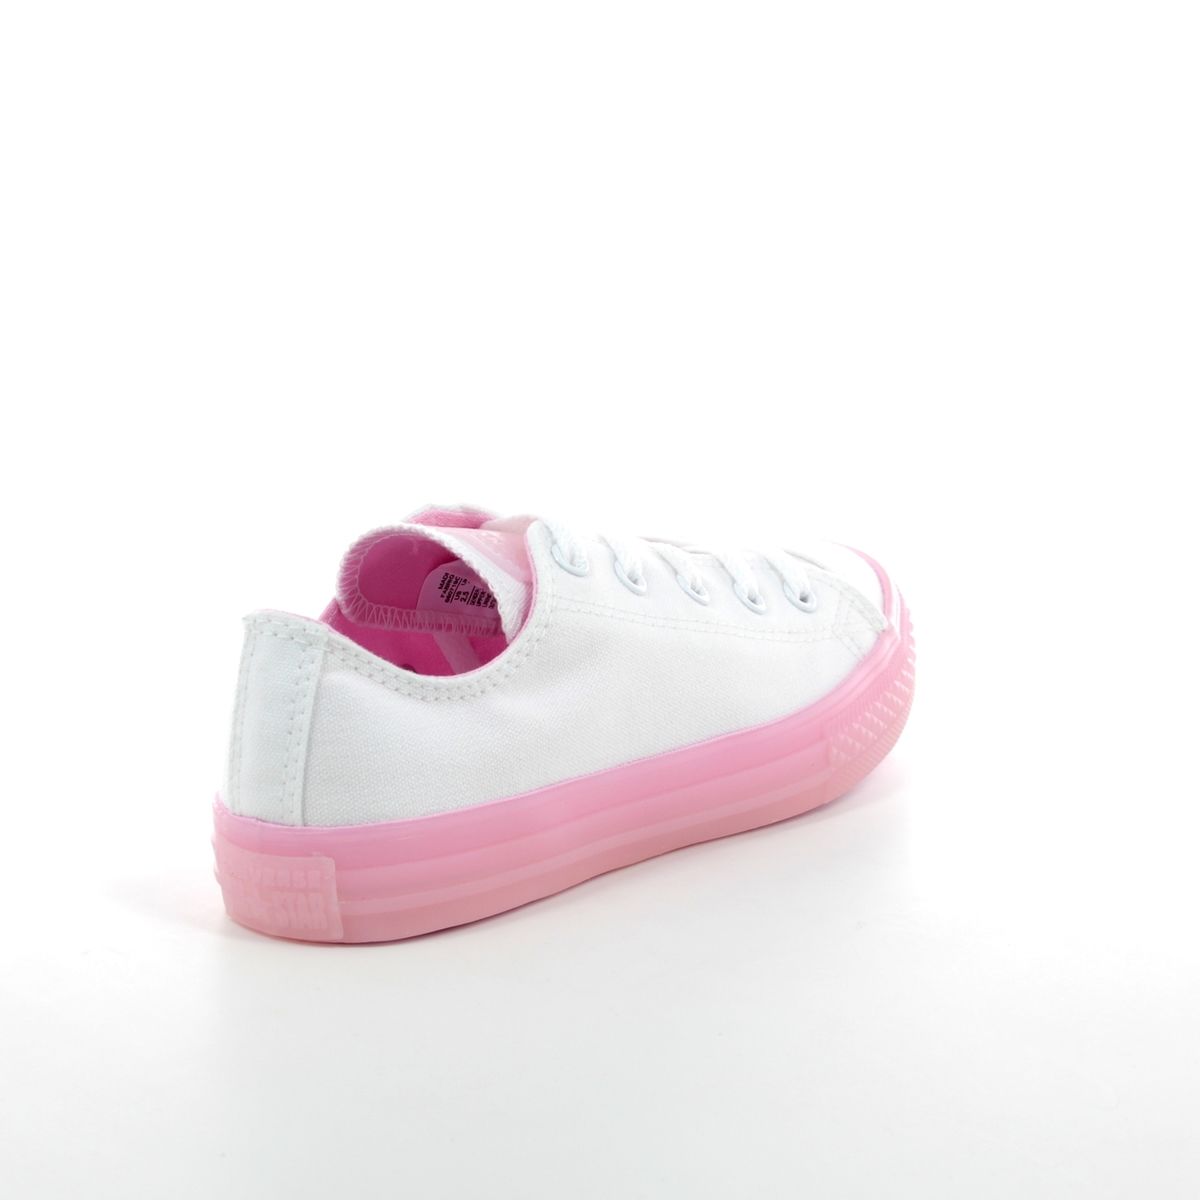 Converse Allstar Ox Jnr 660719C-100 White-Pink combi girls trainers